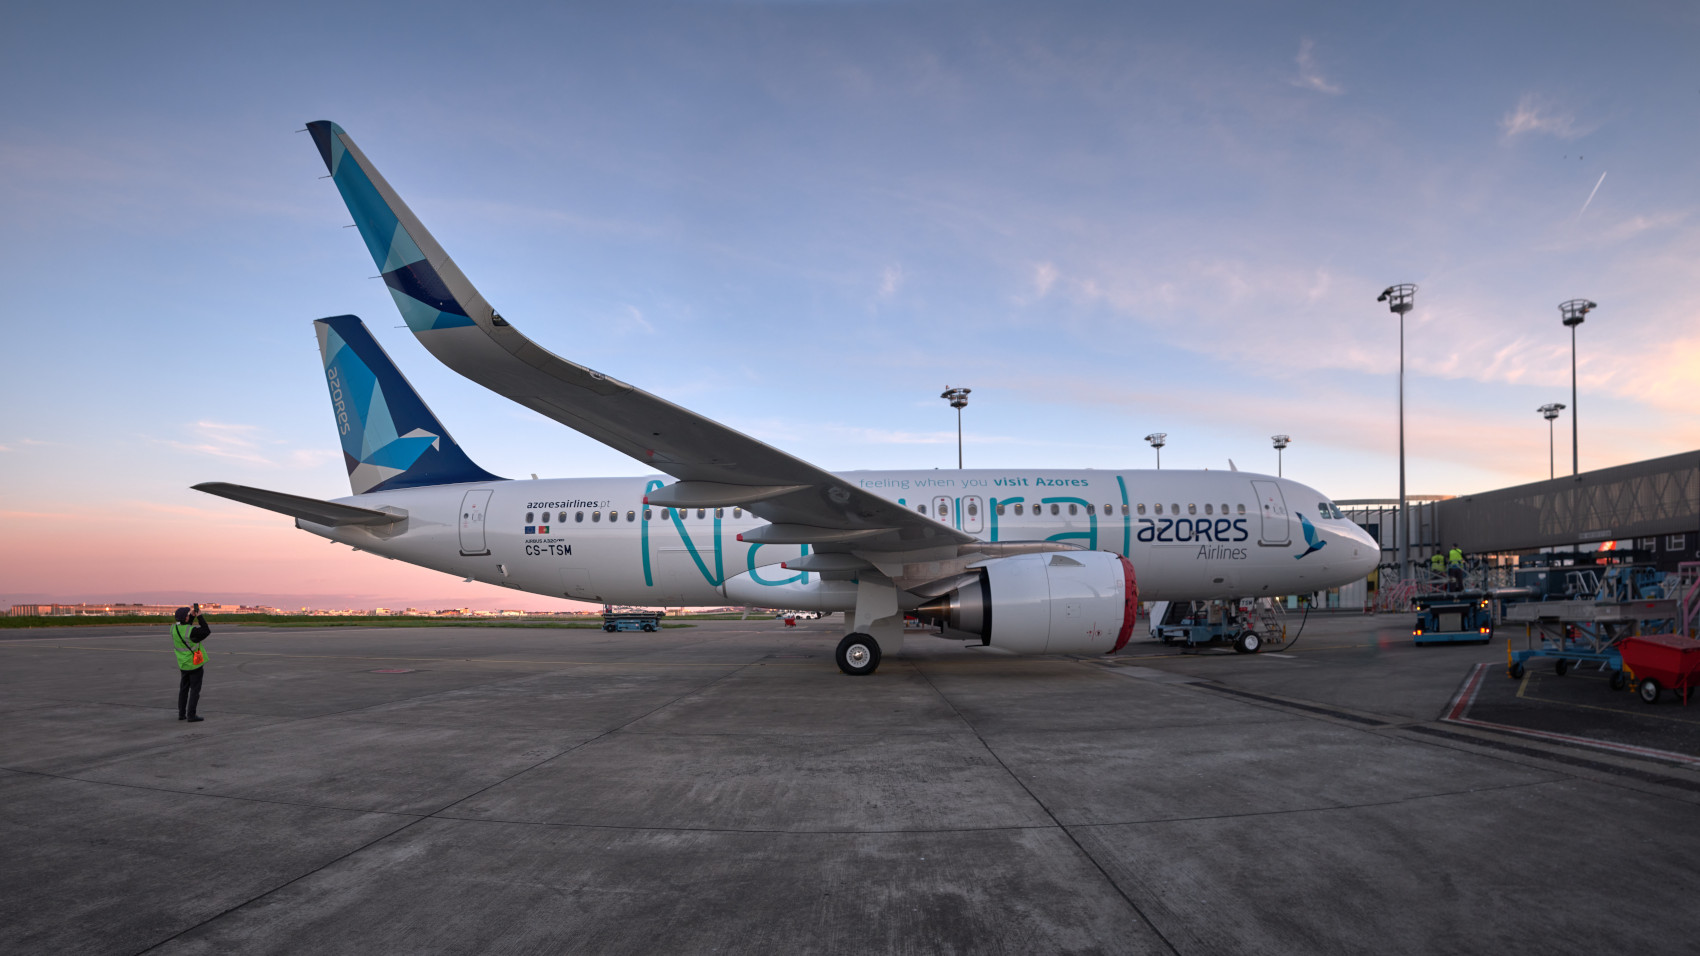 Airbus A320neo "Natural"